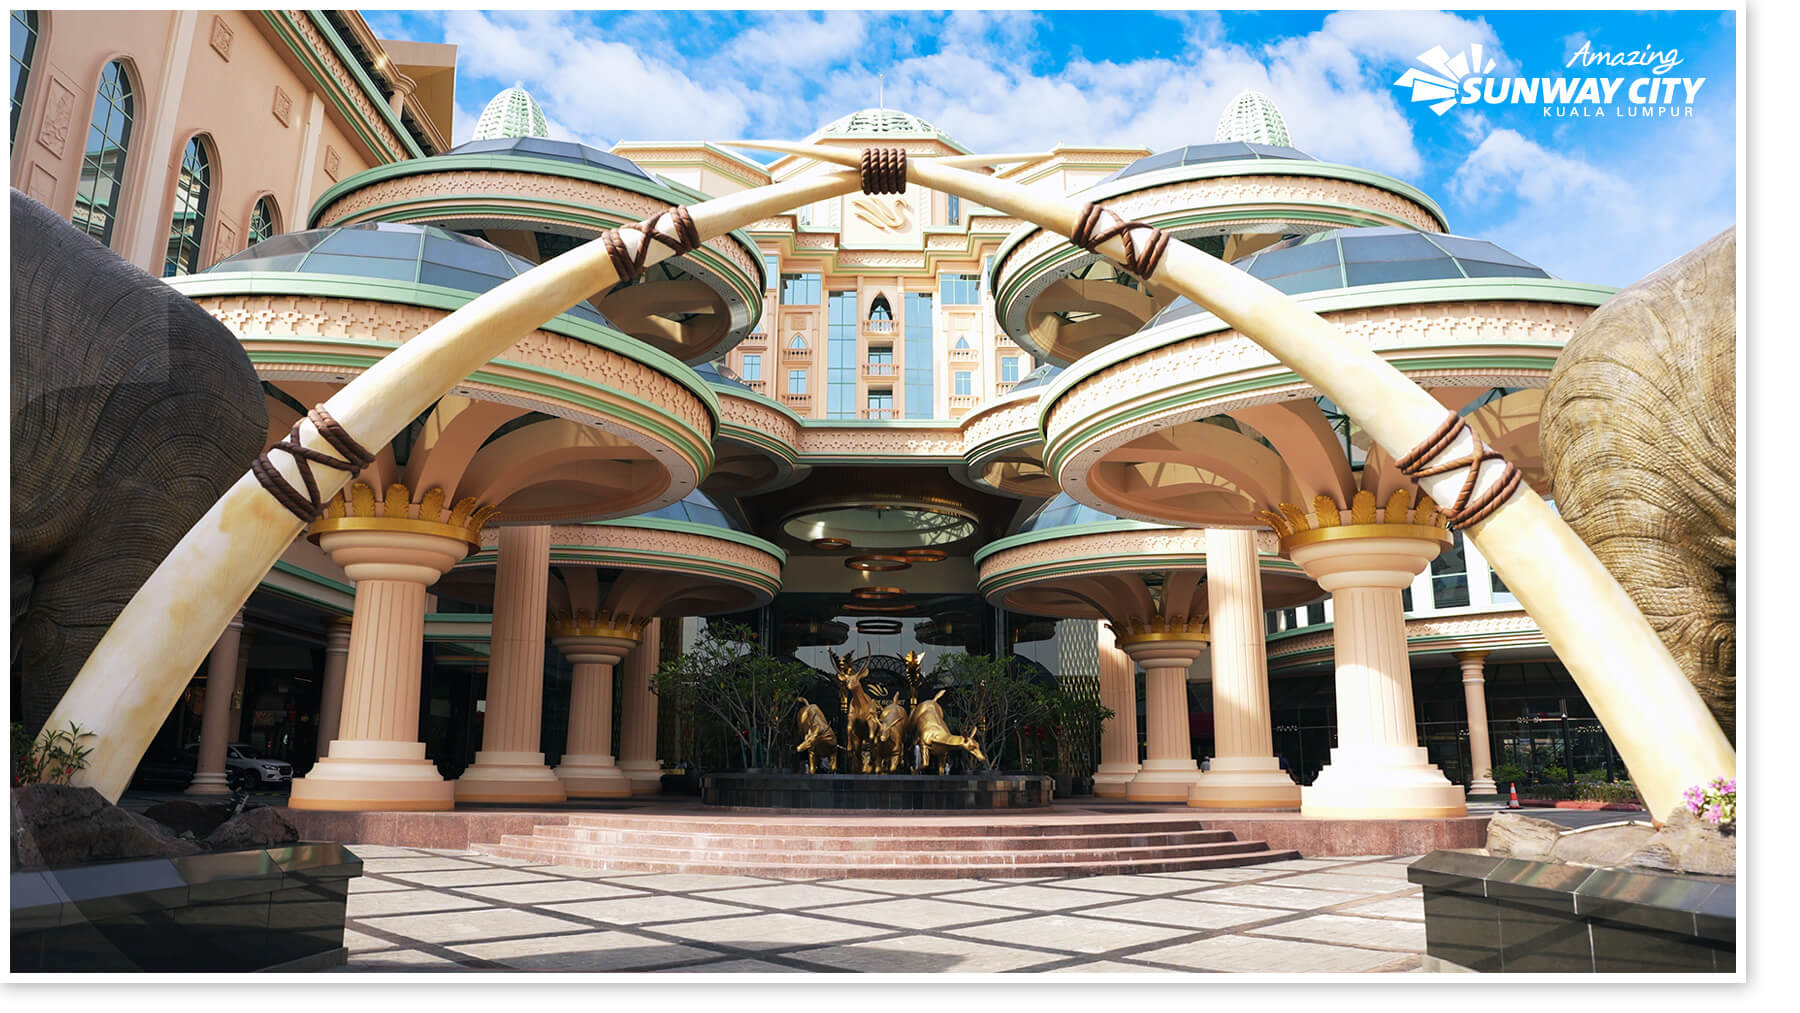 Be enveloped by the grandeur of Sunway Resort Hotel just by the entrance!